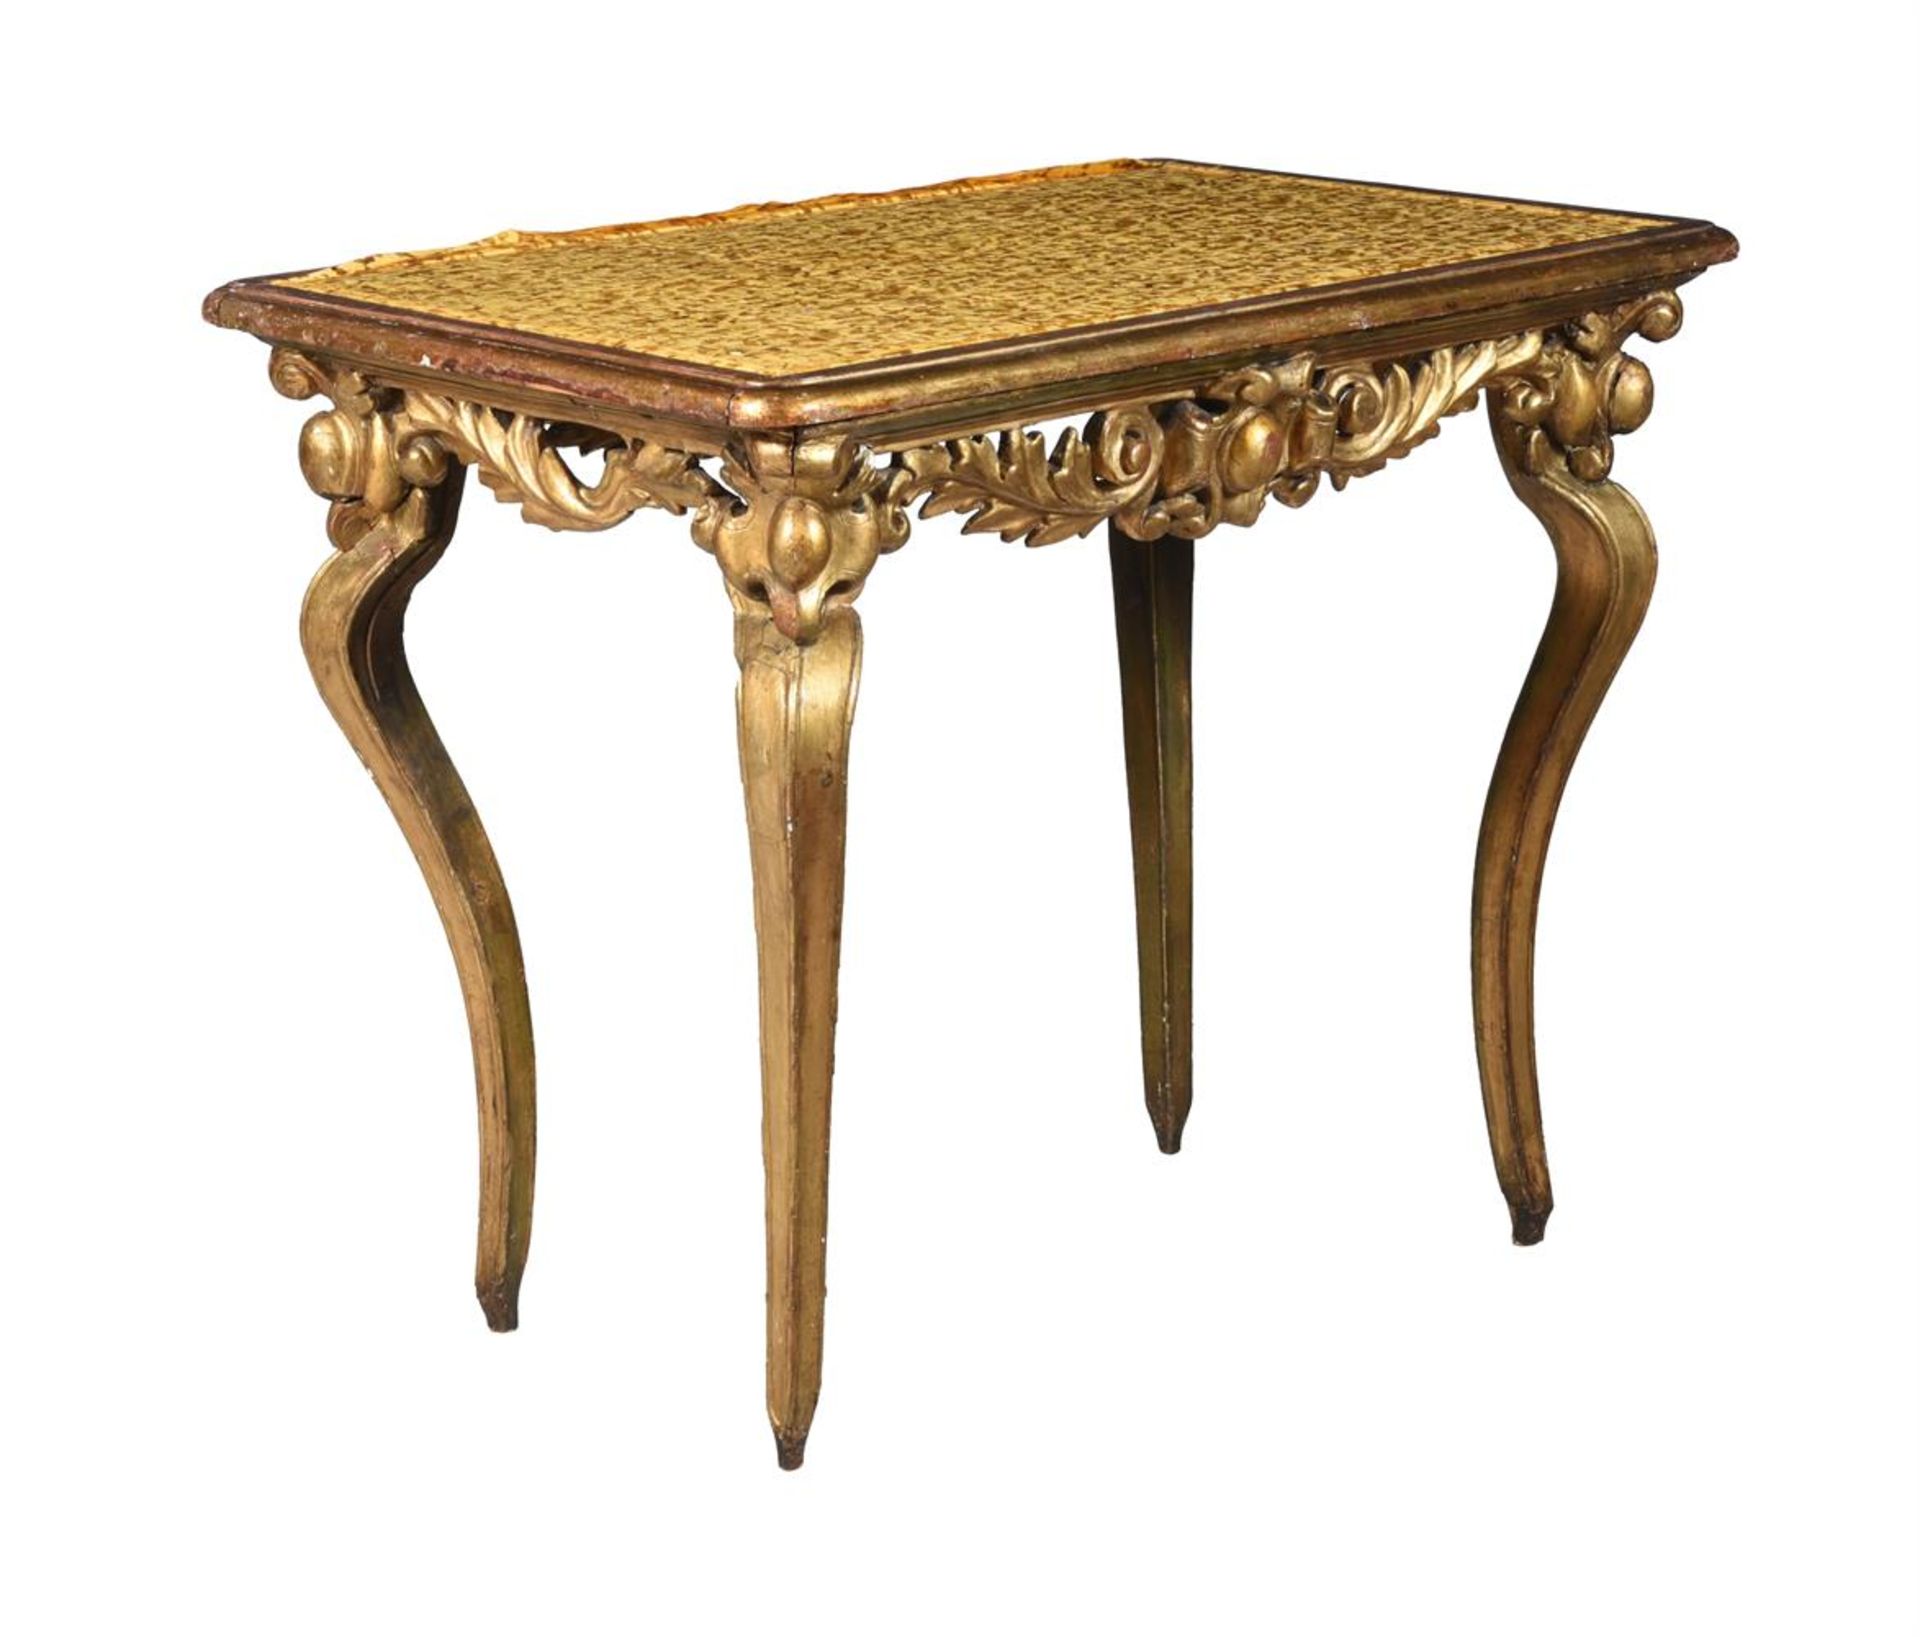 A CONTINENTAL GILTWOOD SIDE TABLE, PROBABLY ITALIAN, 19TH CENTURY